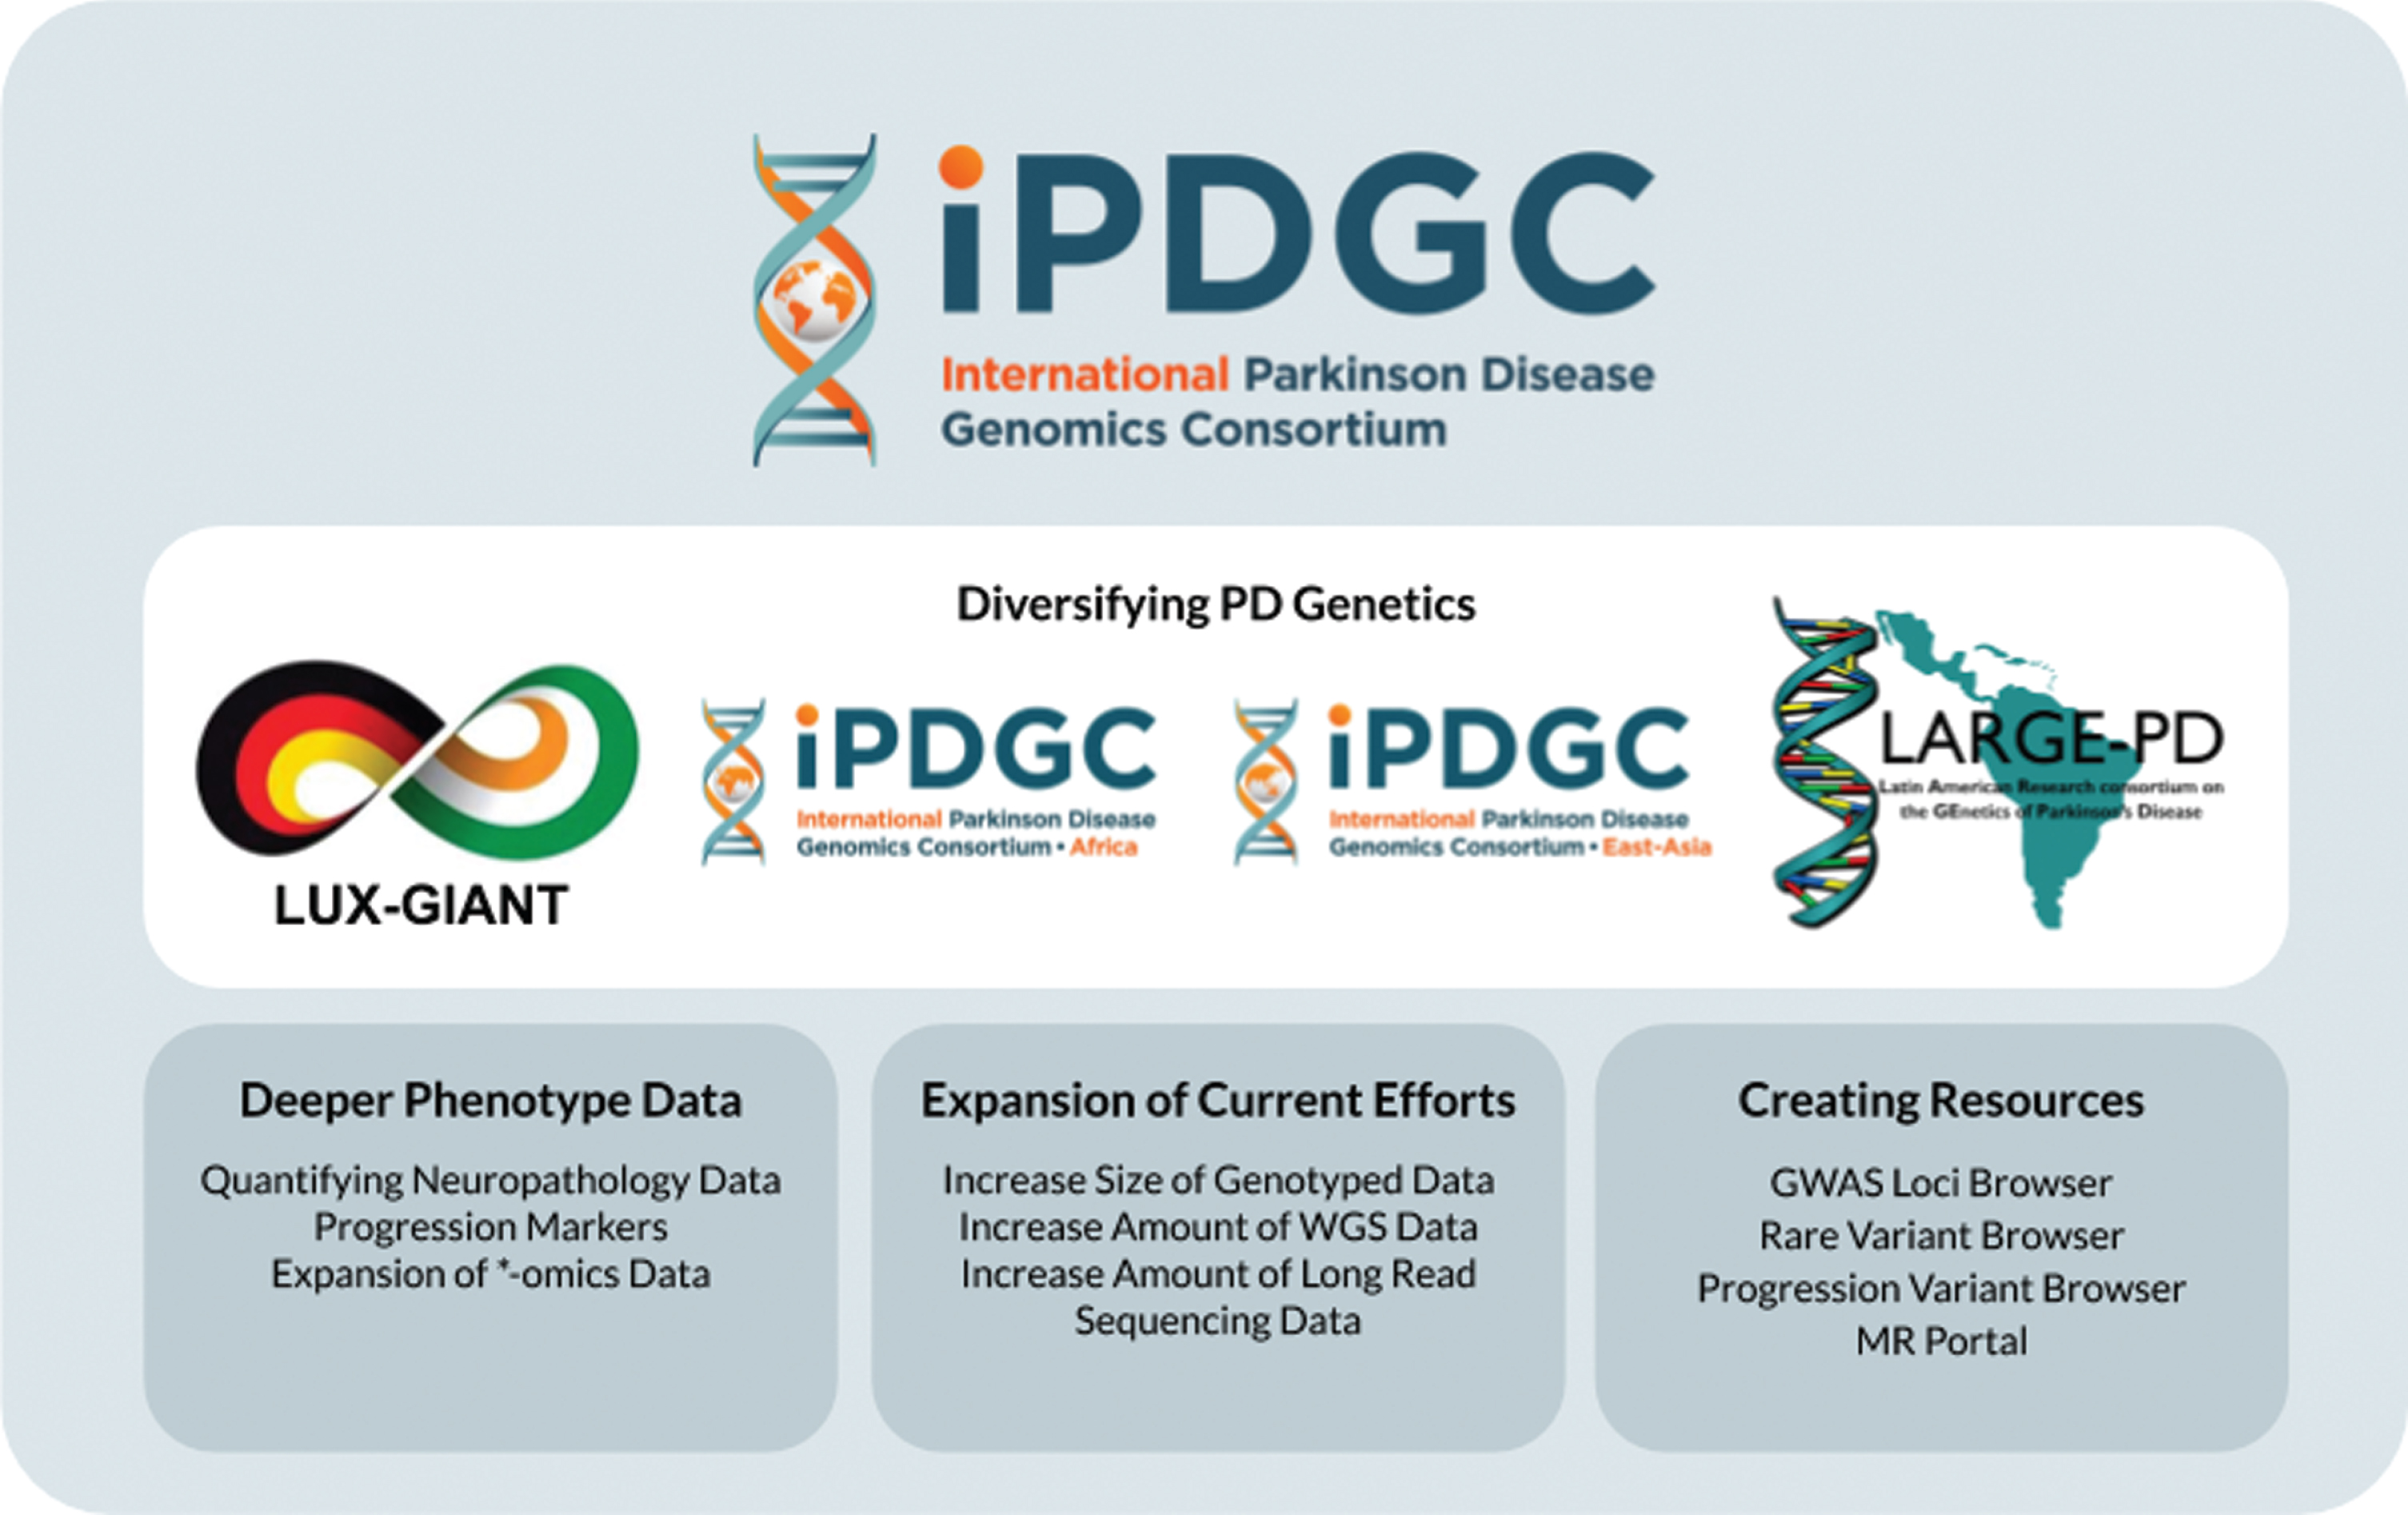 Overview of the past and future work of the IPDGC. WGS, whole-genome sequencing; MR, Mendelian Randomization.